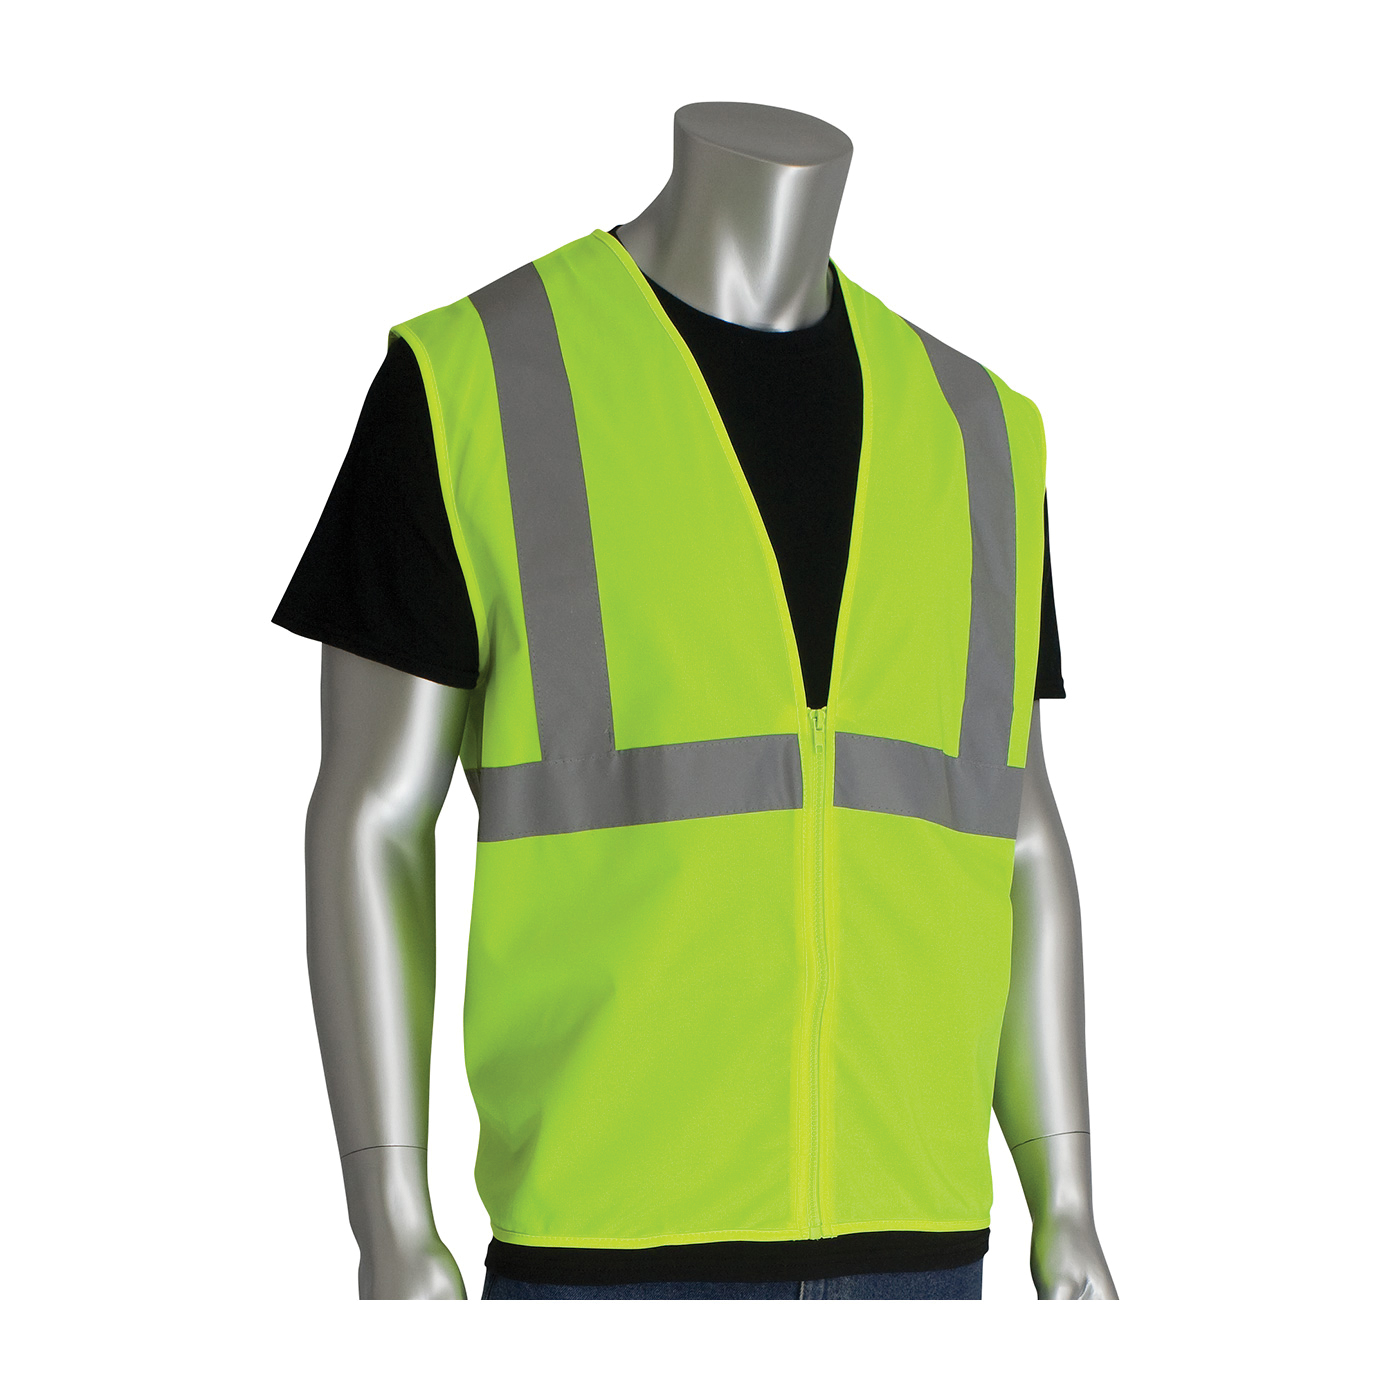 PIP® 302-WCENGZLY-L Standard Solid Vest, L, Hi-Viz Lime Yellow, Polyester Mesh, Zipper Closure, ANSI Class: Class 2, Specifications Met: ANSI 107 Type R Class 2